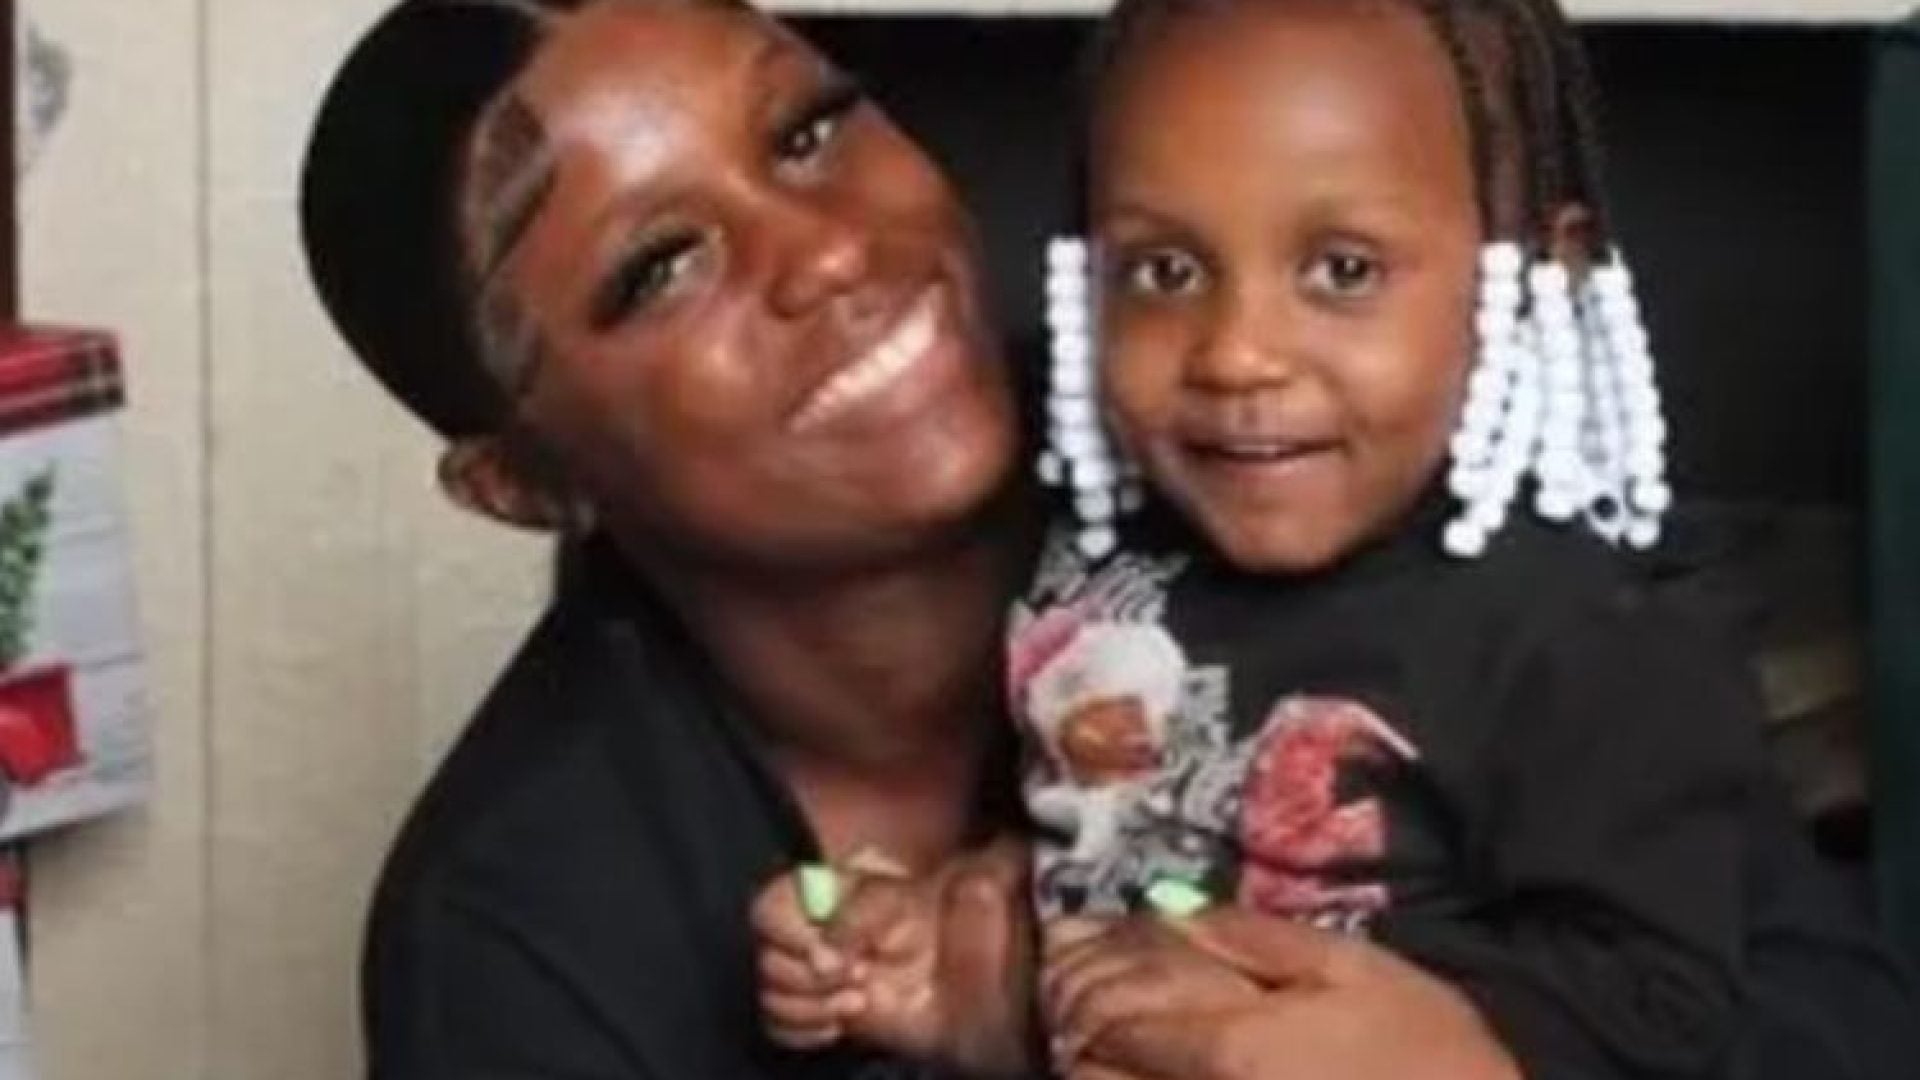 A Florida Community Is Searching For Answers After Mother And Four-Year-Old Daughter Found Fatally Shot In Vehicle Along The Highway